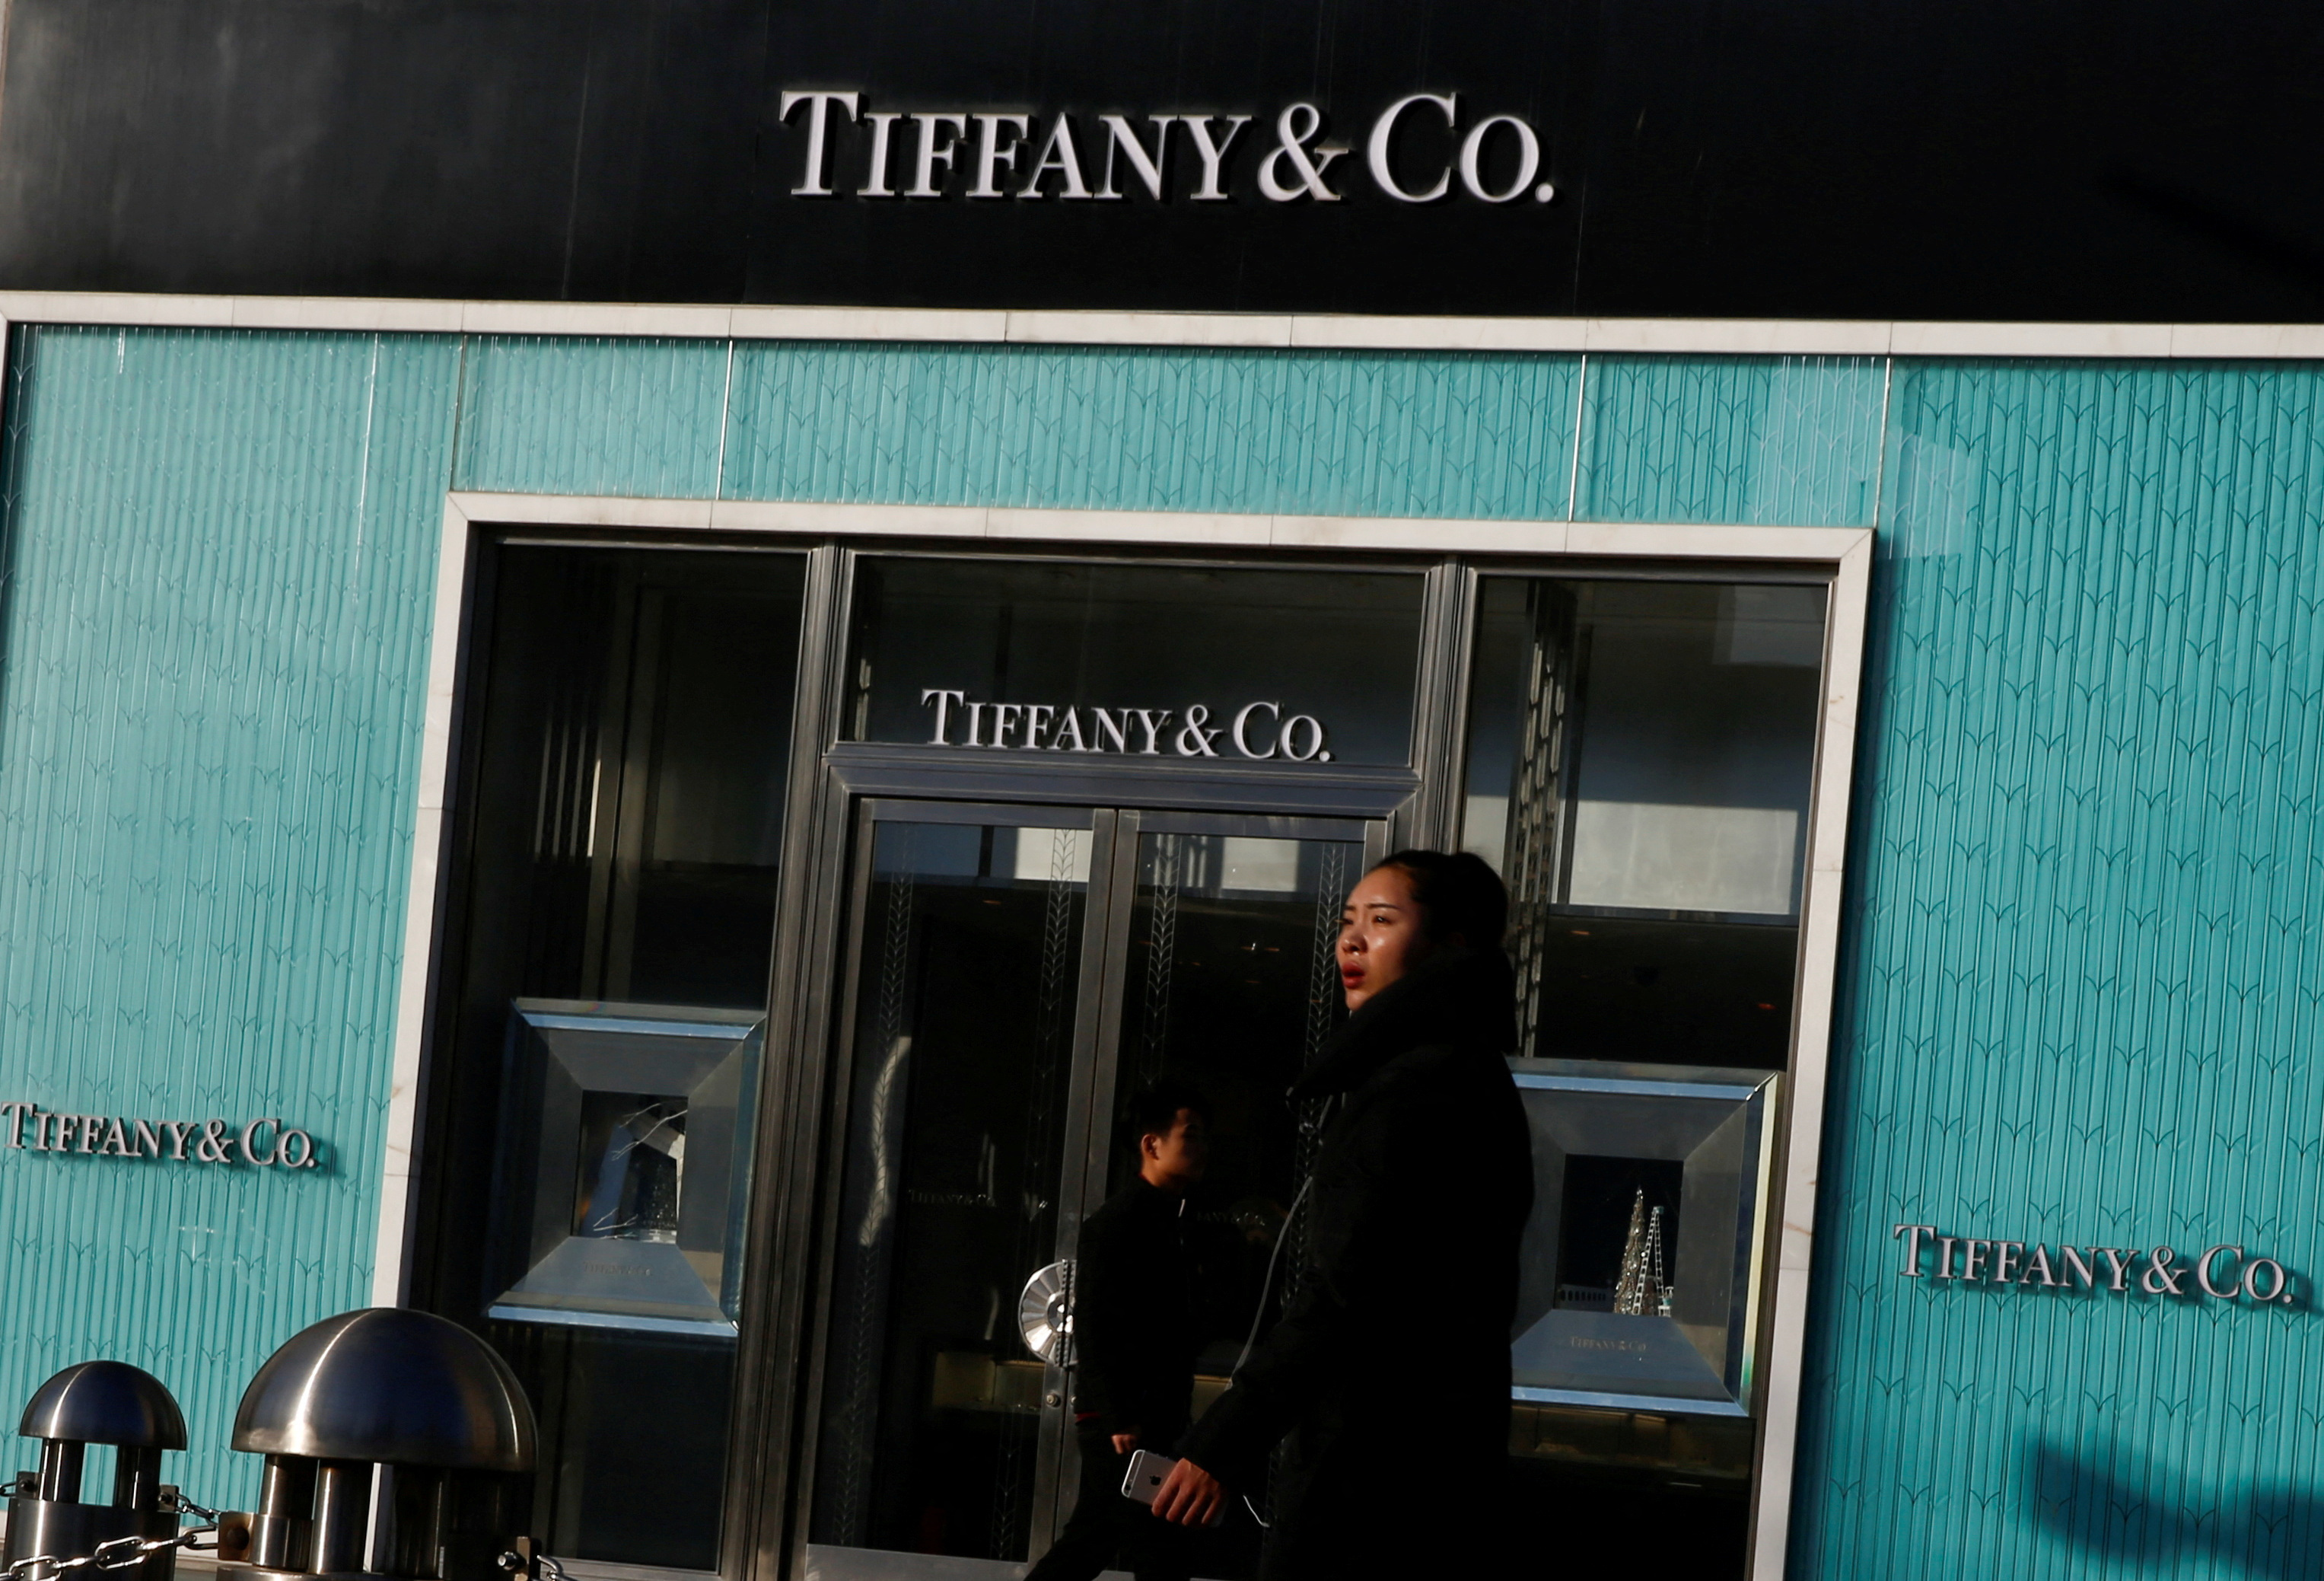 Exclusivity the name of the game as luxury firms target China's